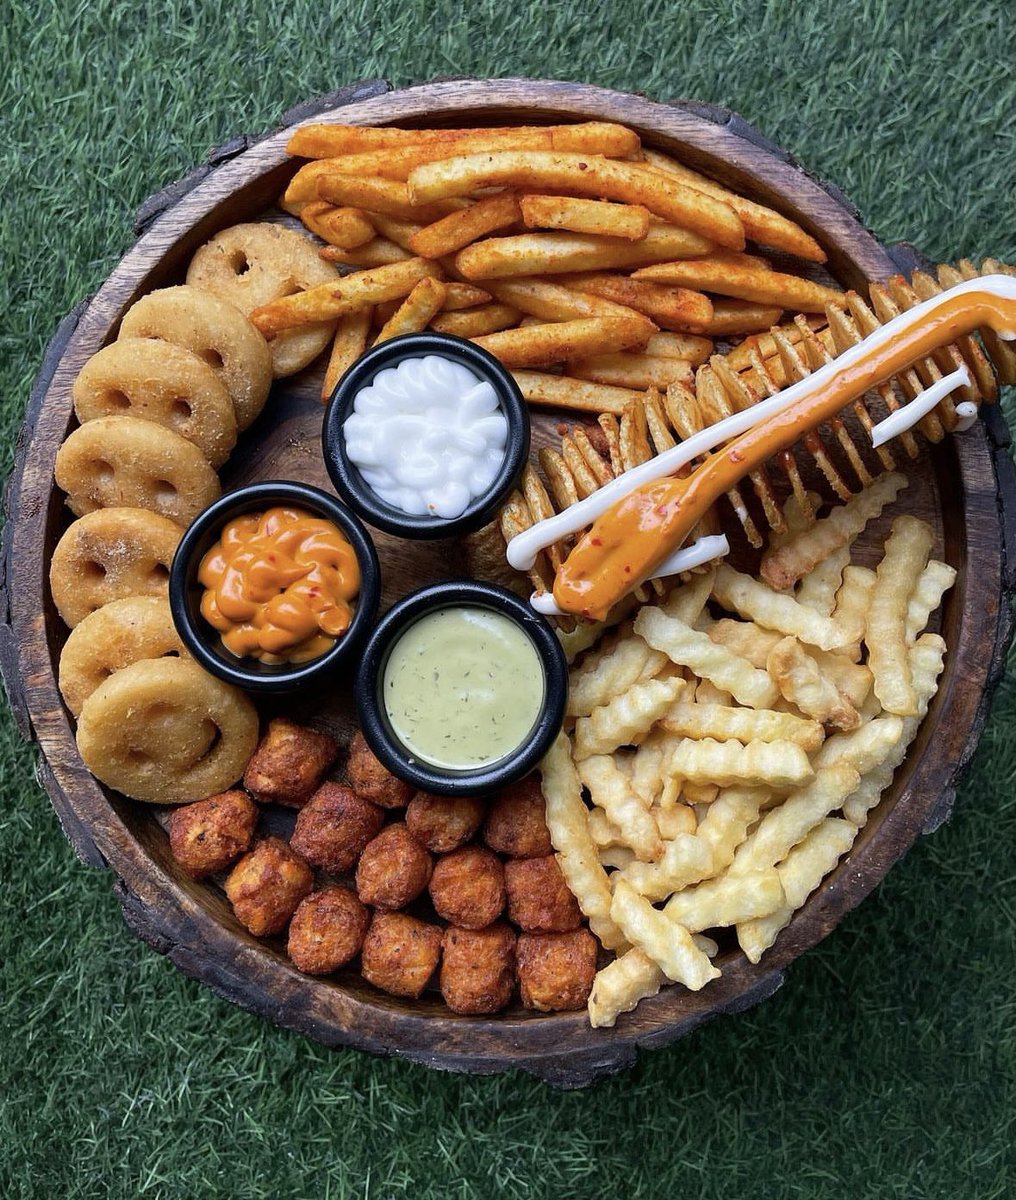 How do you like your potatoes 🥔? Fries 🍟, Crinkle Fries, Smiles, Spiral, Croutons 🍟?